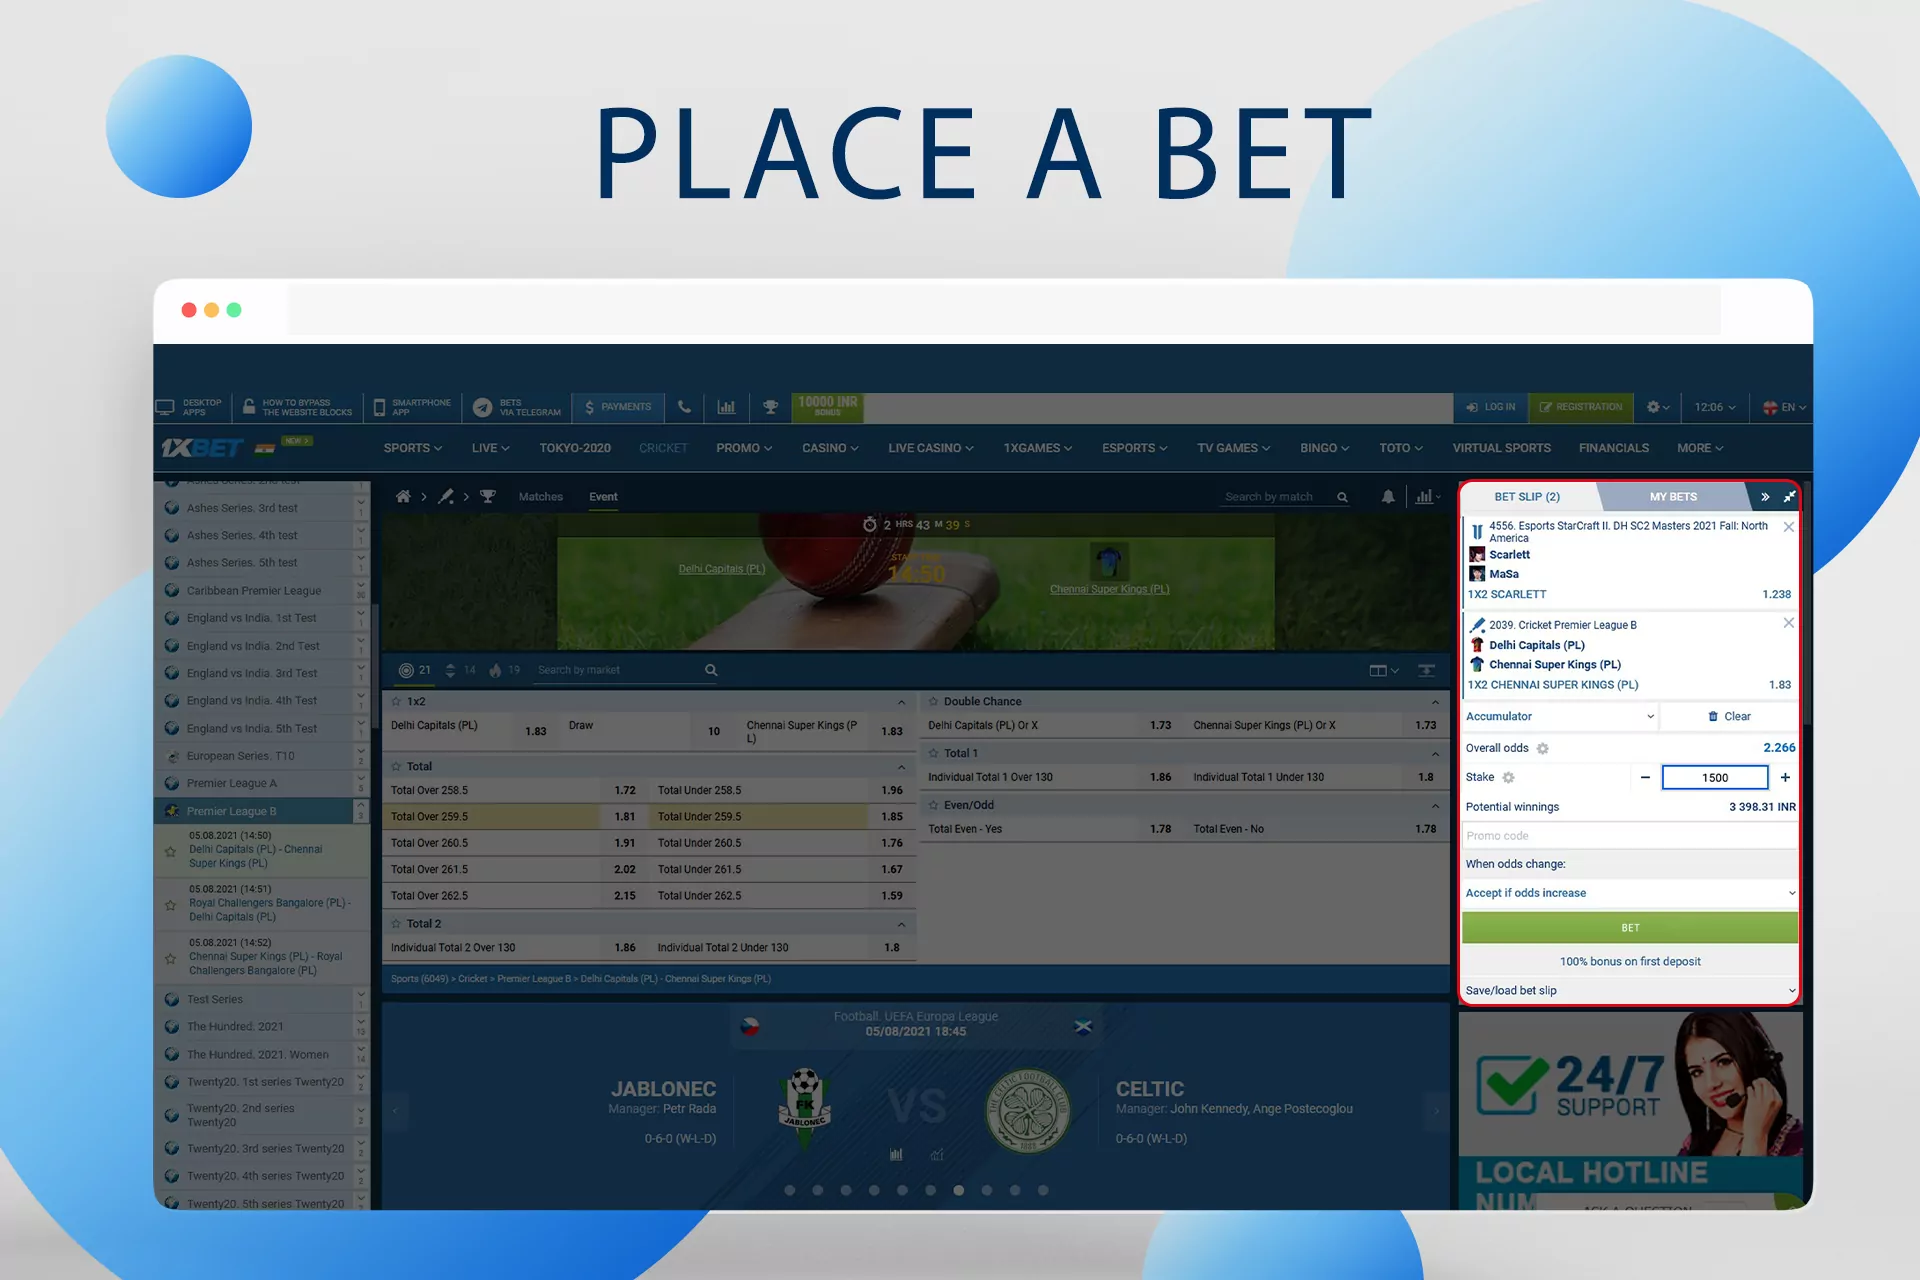 Choose a match and place a bet on it.